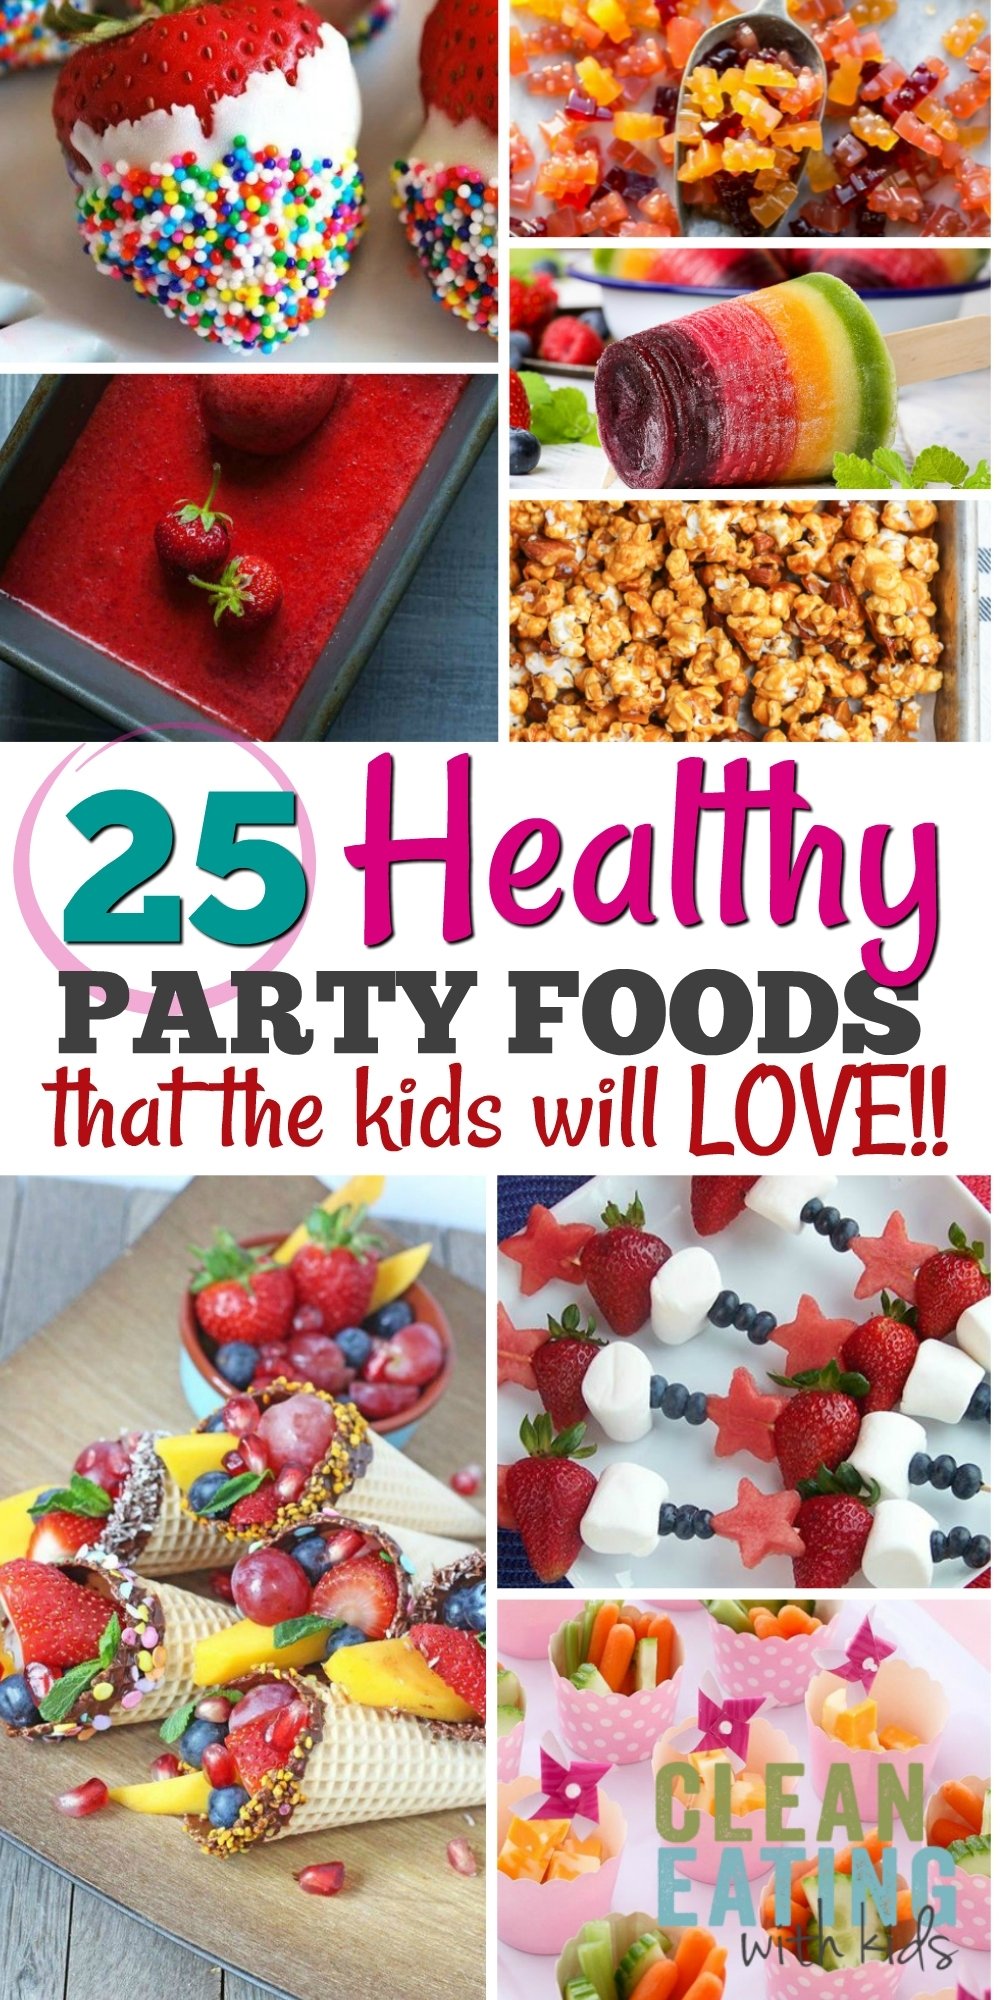 10 Nice Cheap Food Ideas For Birthday Parties 2020